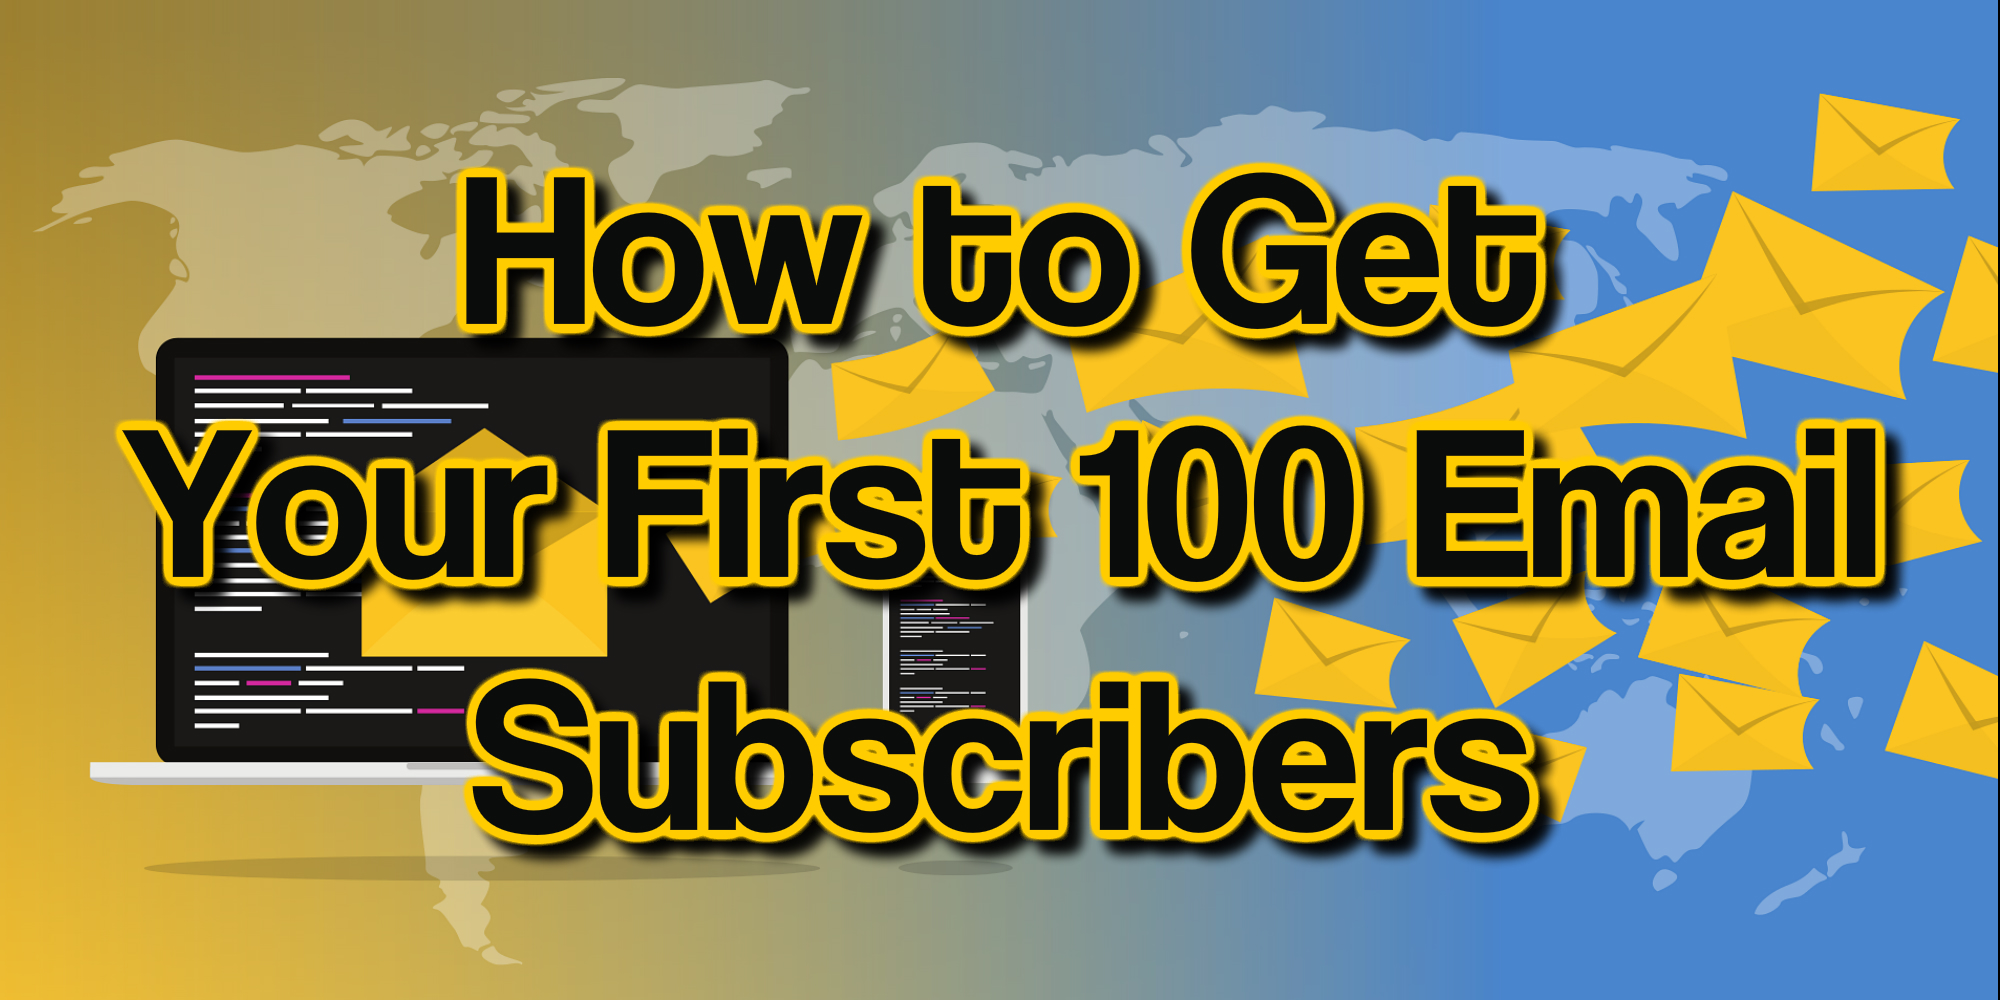 How to Get Your First 100 Email Subscribers